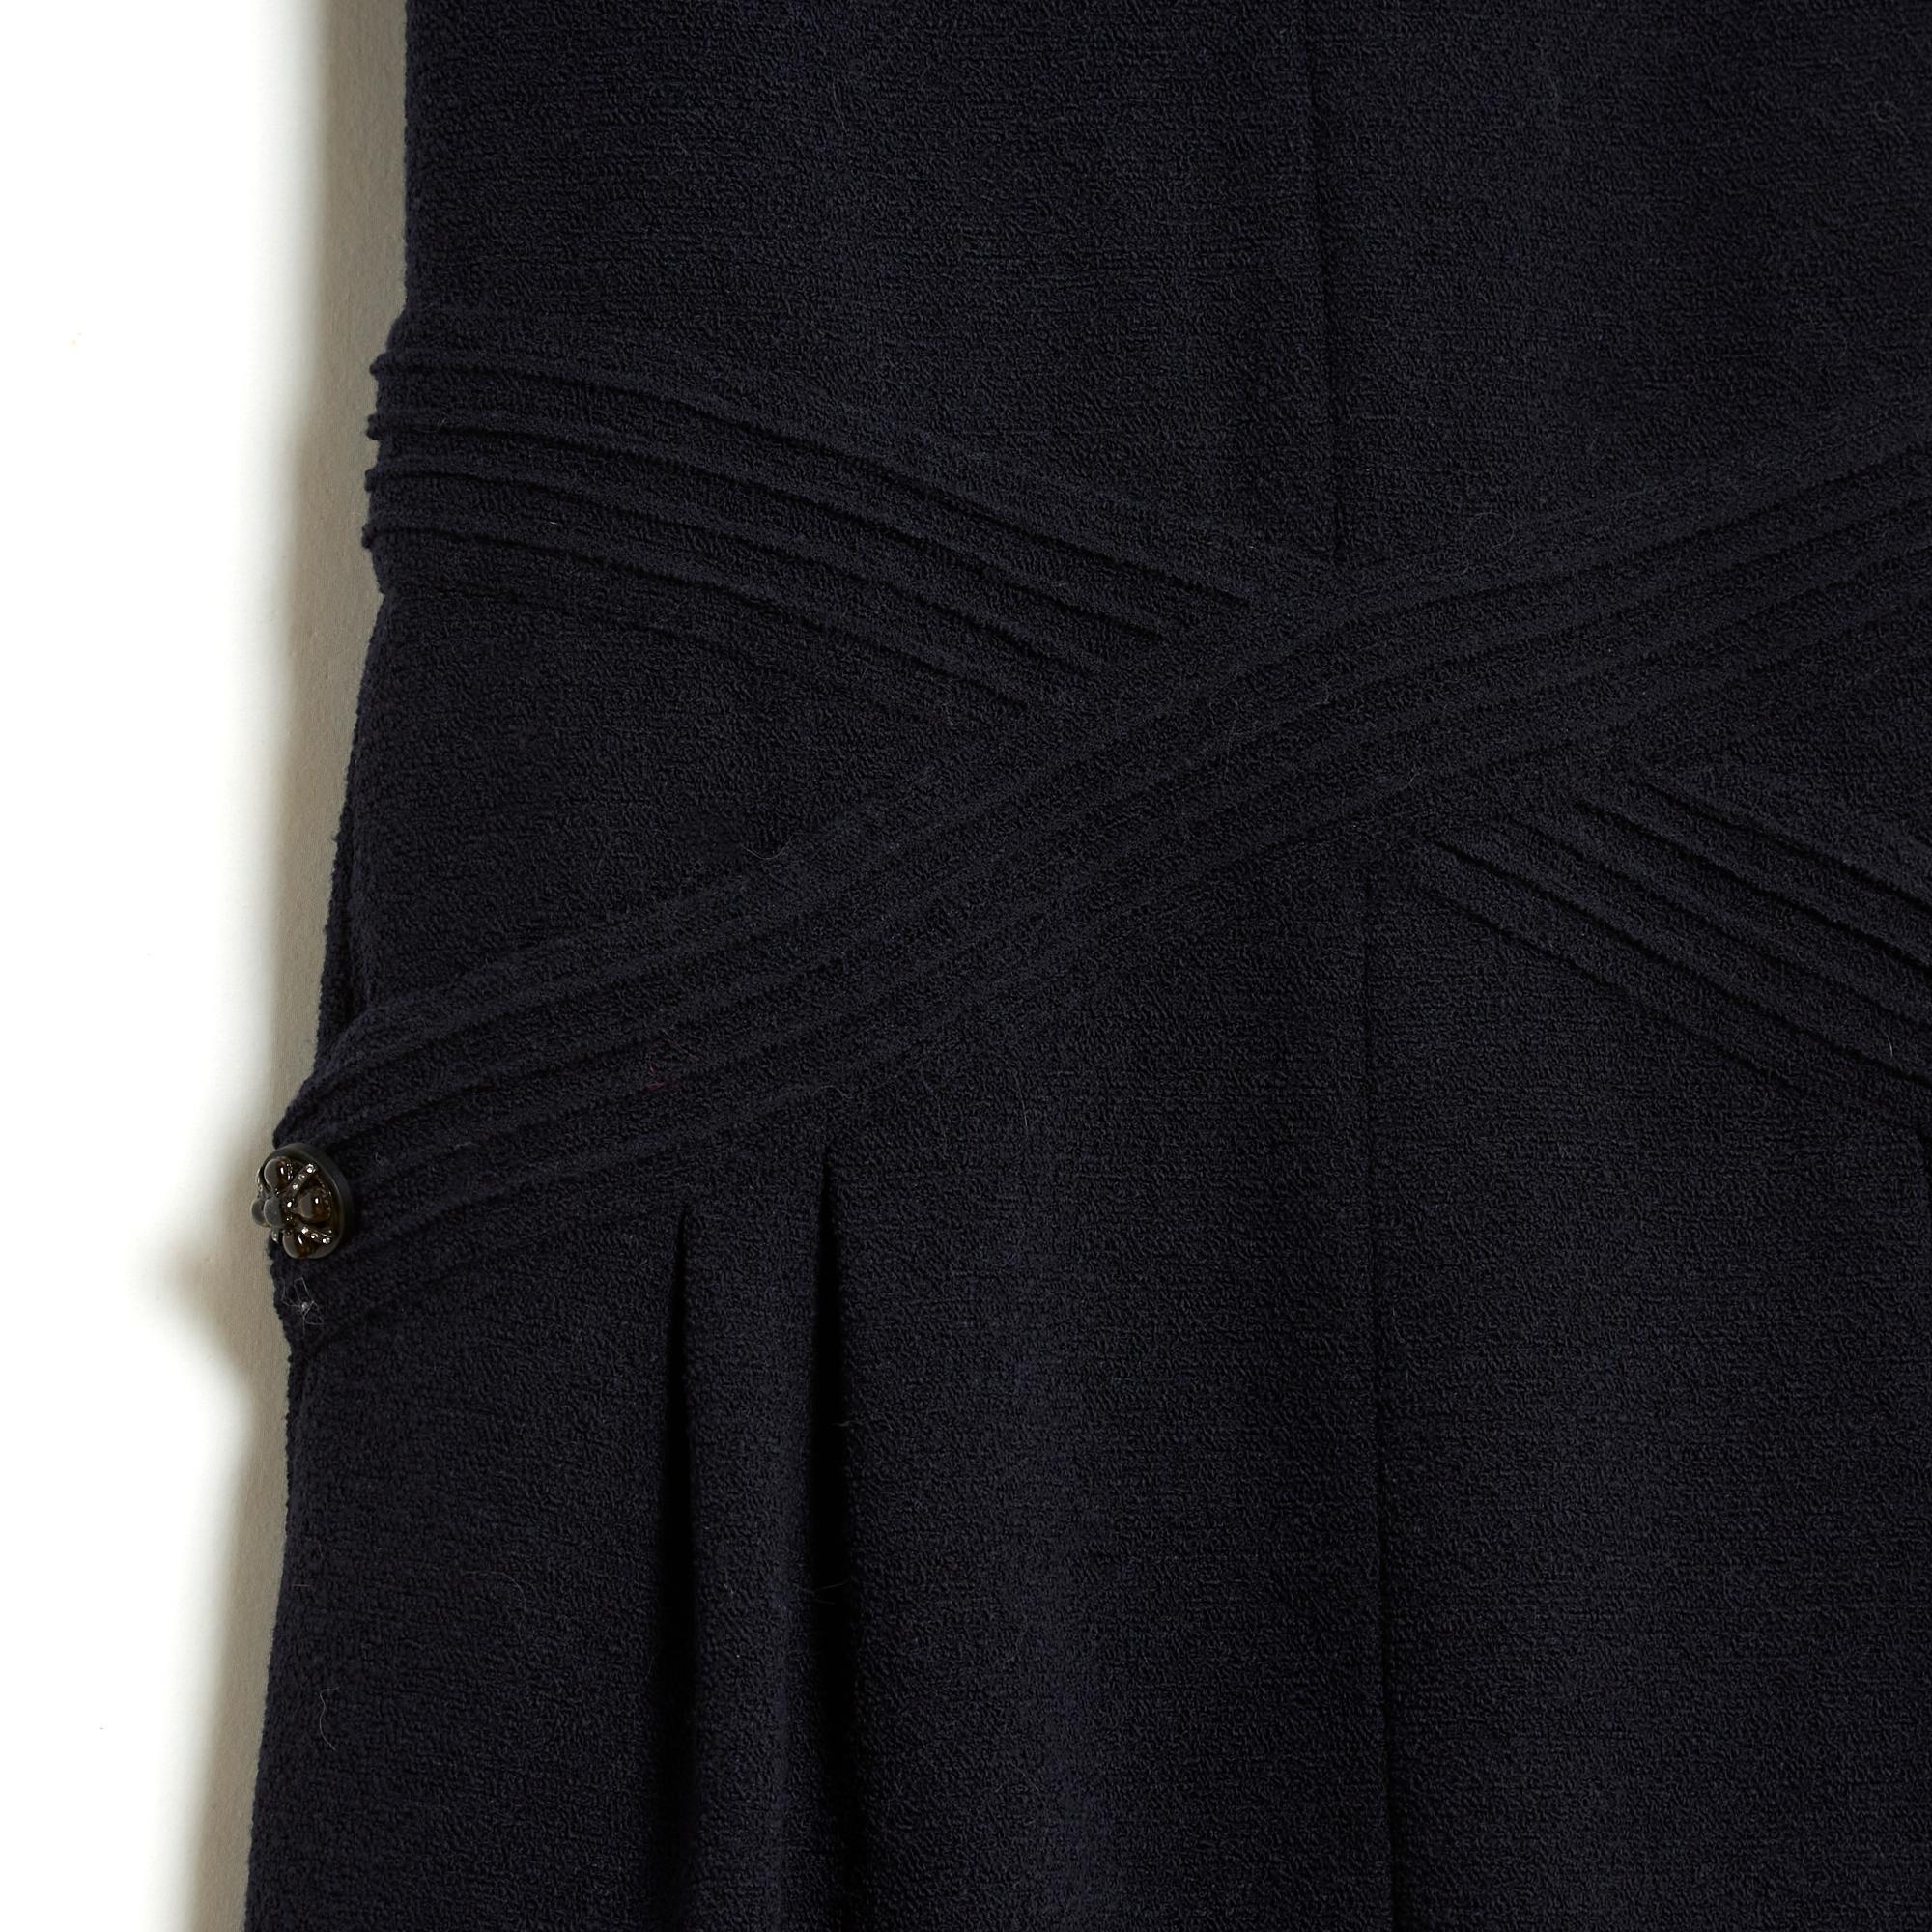 Chanel dress from the Métiers d'Art Paris Bombay collection (pre fall 2012) in navy blue terry wool, boat neck, crossed yoke on the top of the skirt concealing 2 slit pockets, slightly 